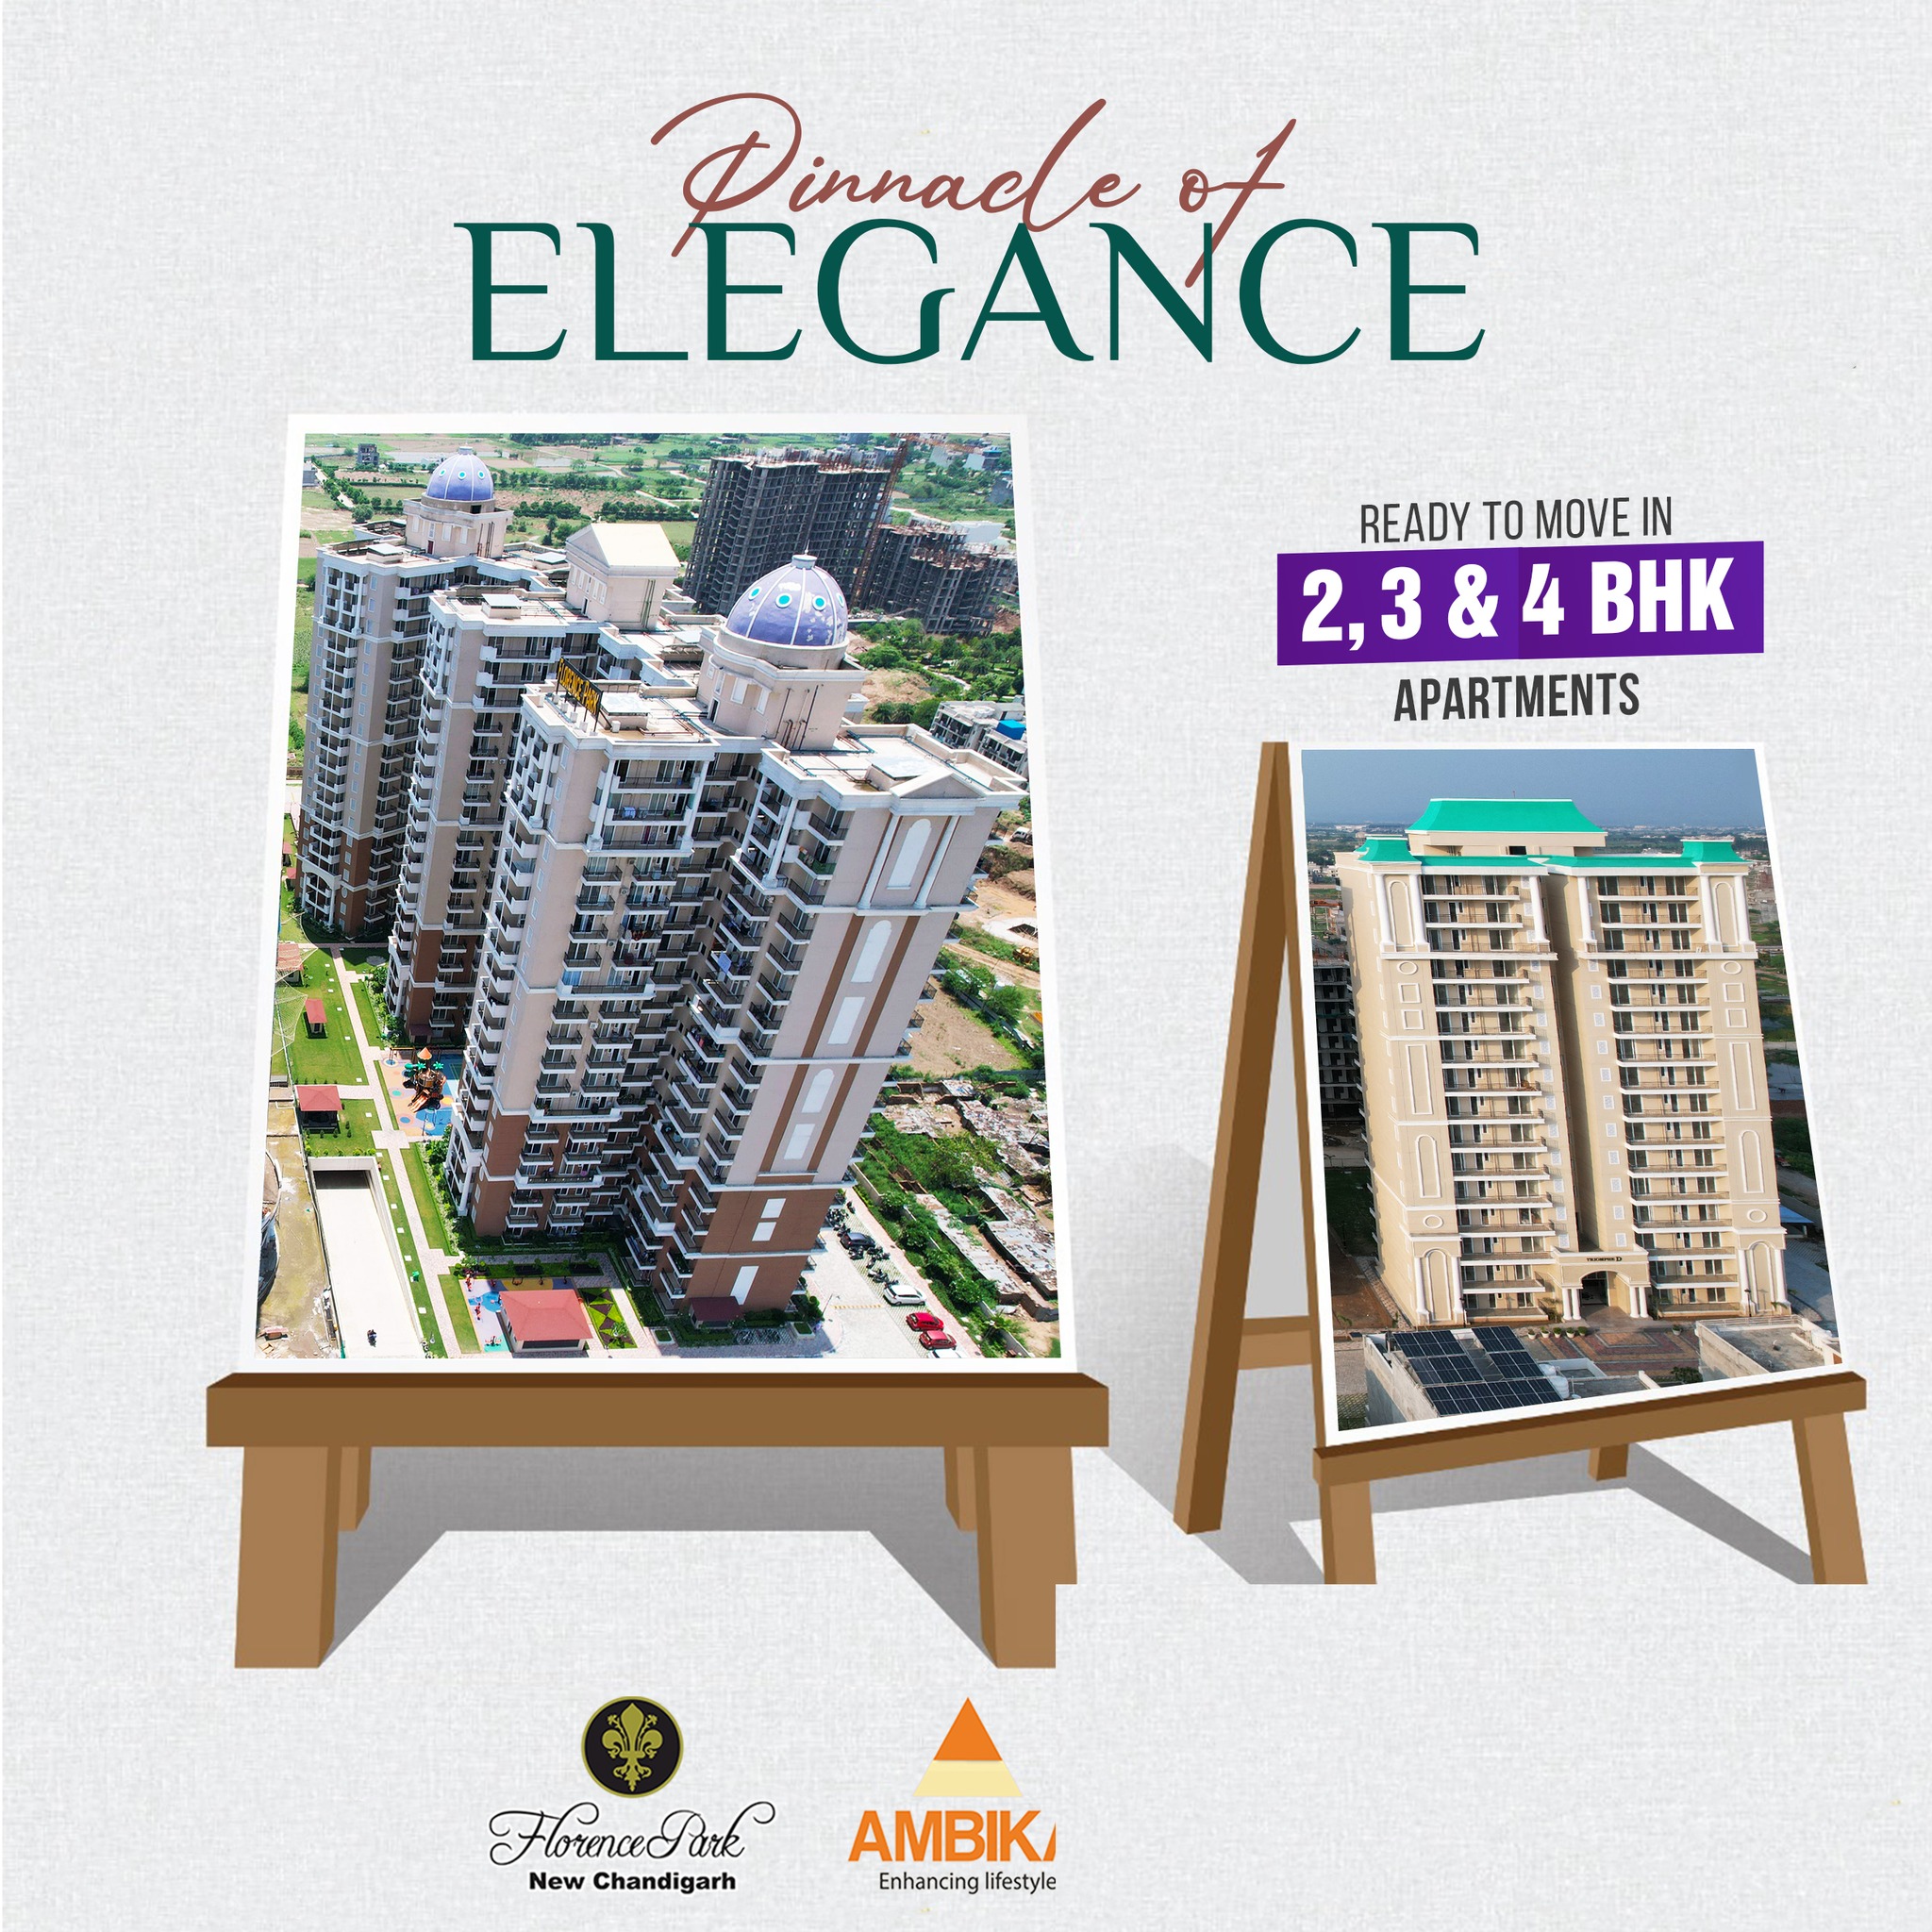 Pinnacle of Elegance Book your dream home at Ambika Florence Park, Chandigarh